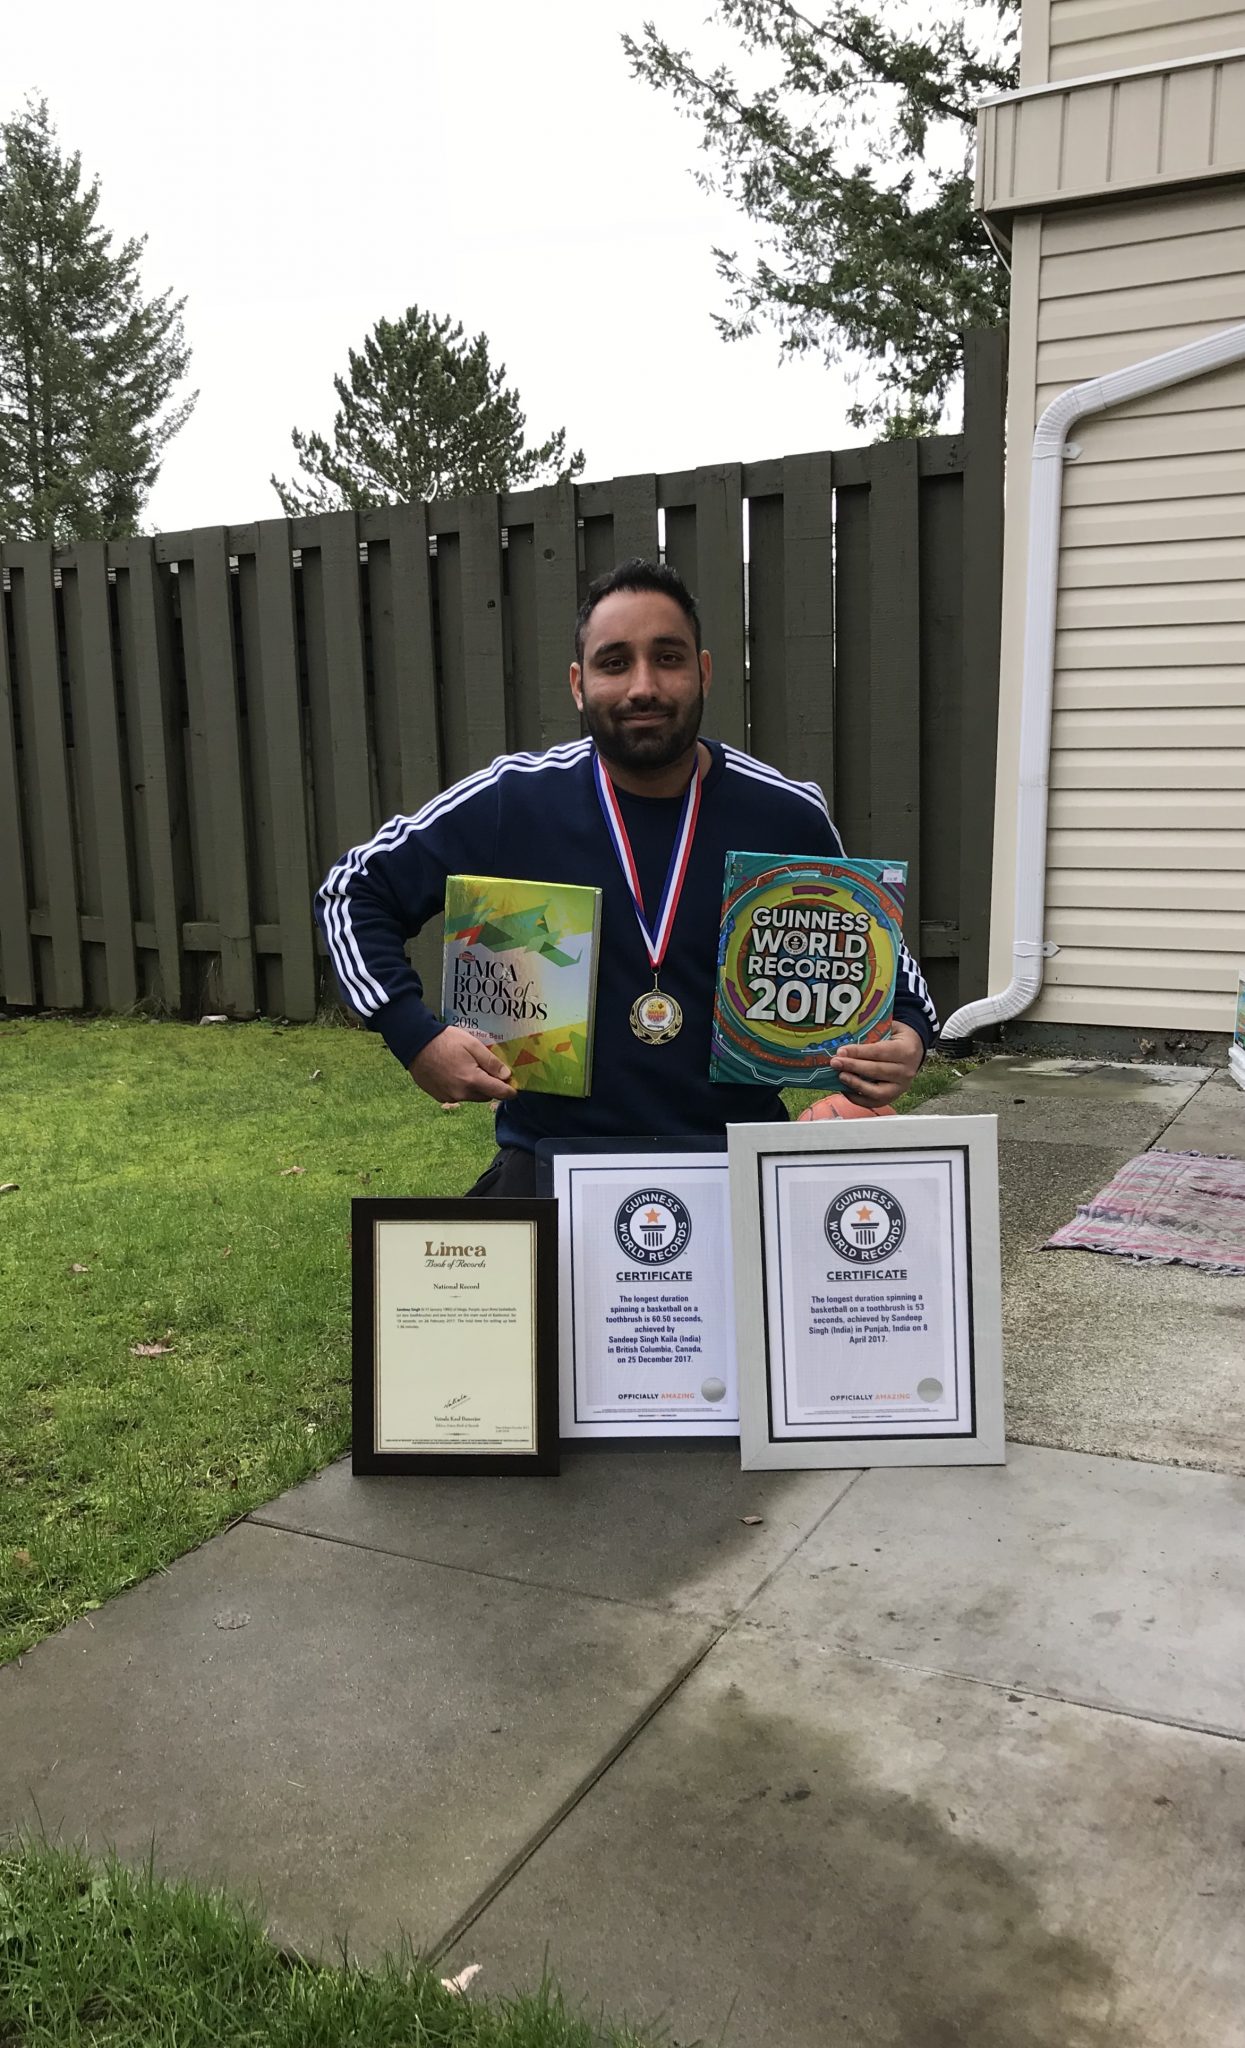 Local Abbotsford Man Sets Guinness World Record